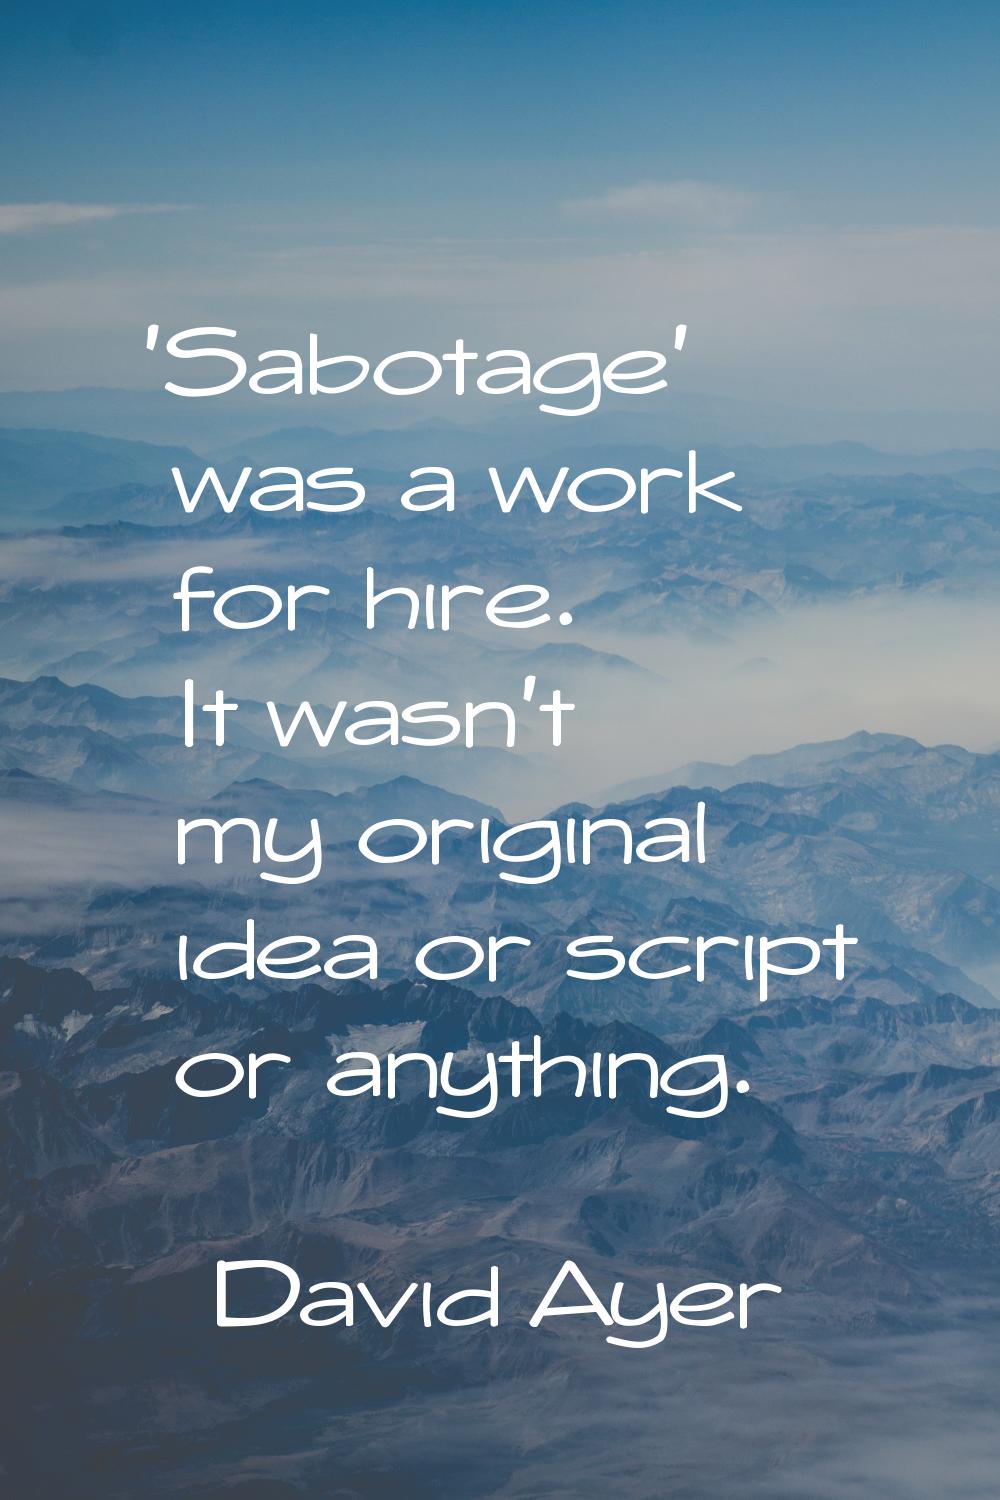 'Sabotage' was a work for hire. It wasn't my original idea or script or anything.